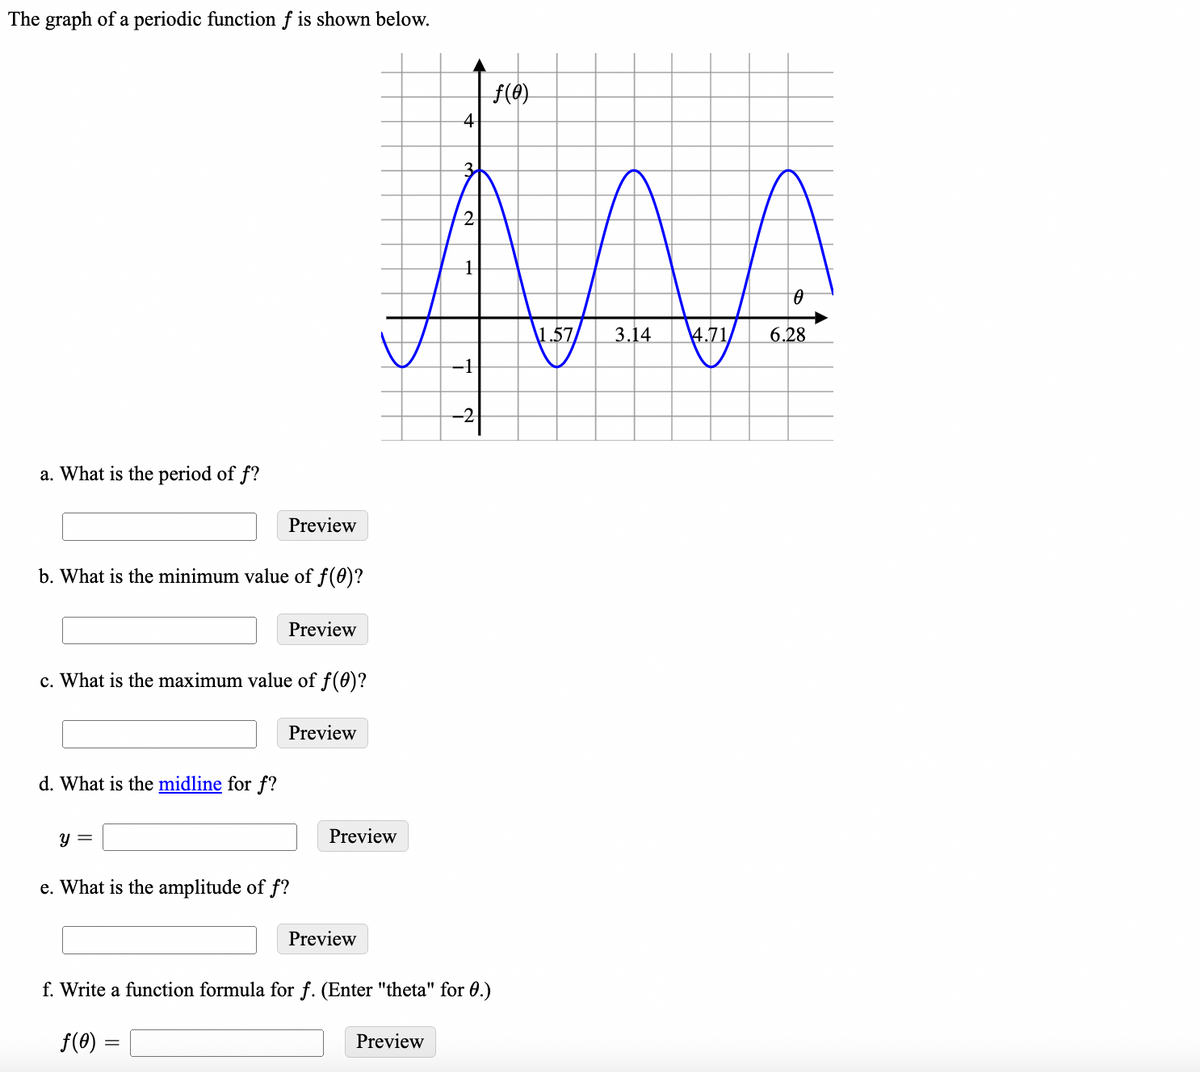 The graph of a periodic function f is shown below.
f(4)
4
3.
2.
\1.57
3.14
4.71
6.28
-1
-2
a. What is the period of f?
Preview
b. What is the minimum value of f(0)?
Preview
c. What is the maximum value of f(0)?
Preview
d. What is the midline for f?
y =
Preview
e. What is the amplitude of f?
Preview
f. Write a function formula for f. (Enter "theta" for 0.)
f(8) =
Preview
